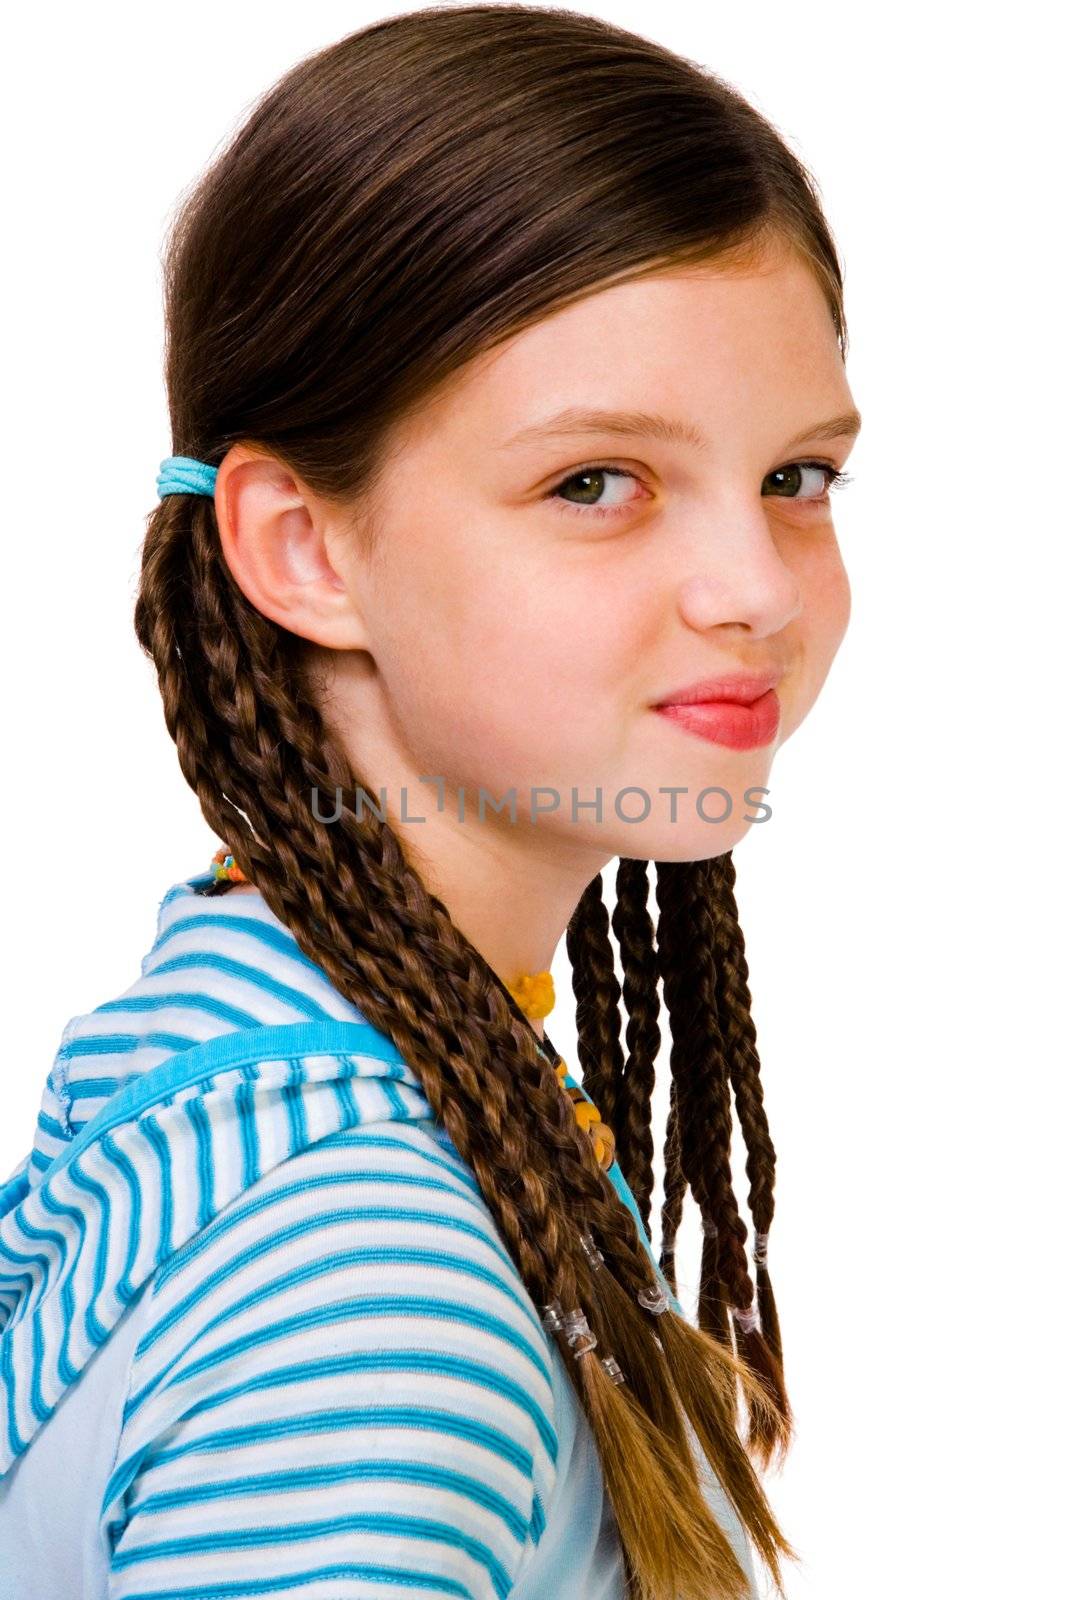 Girl smiling isolated over white